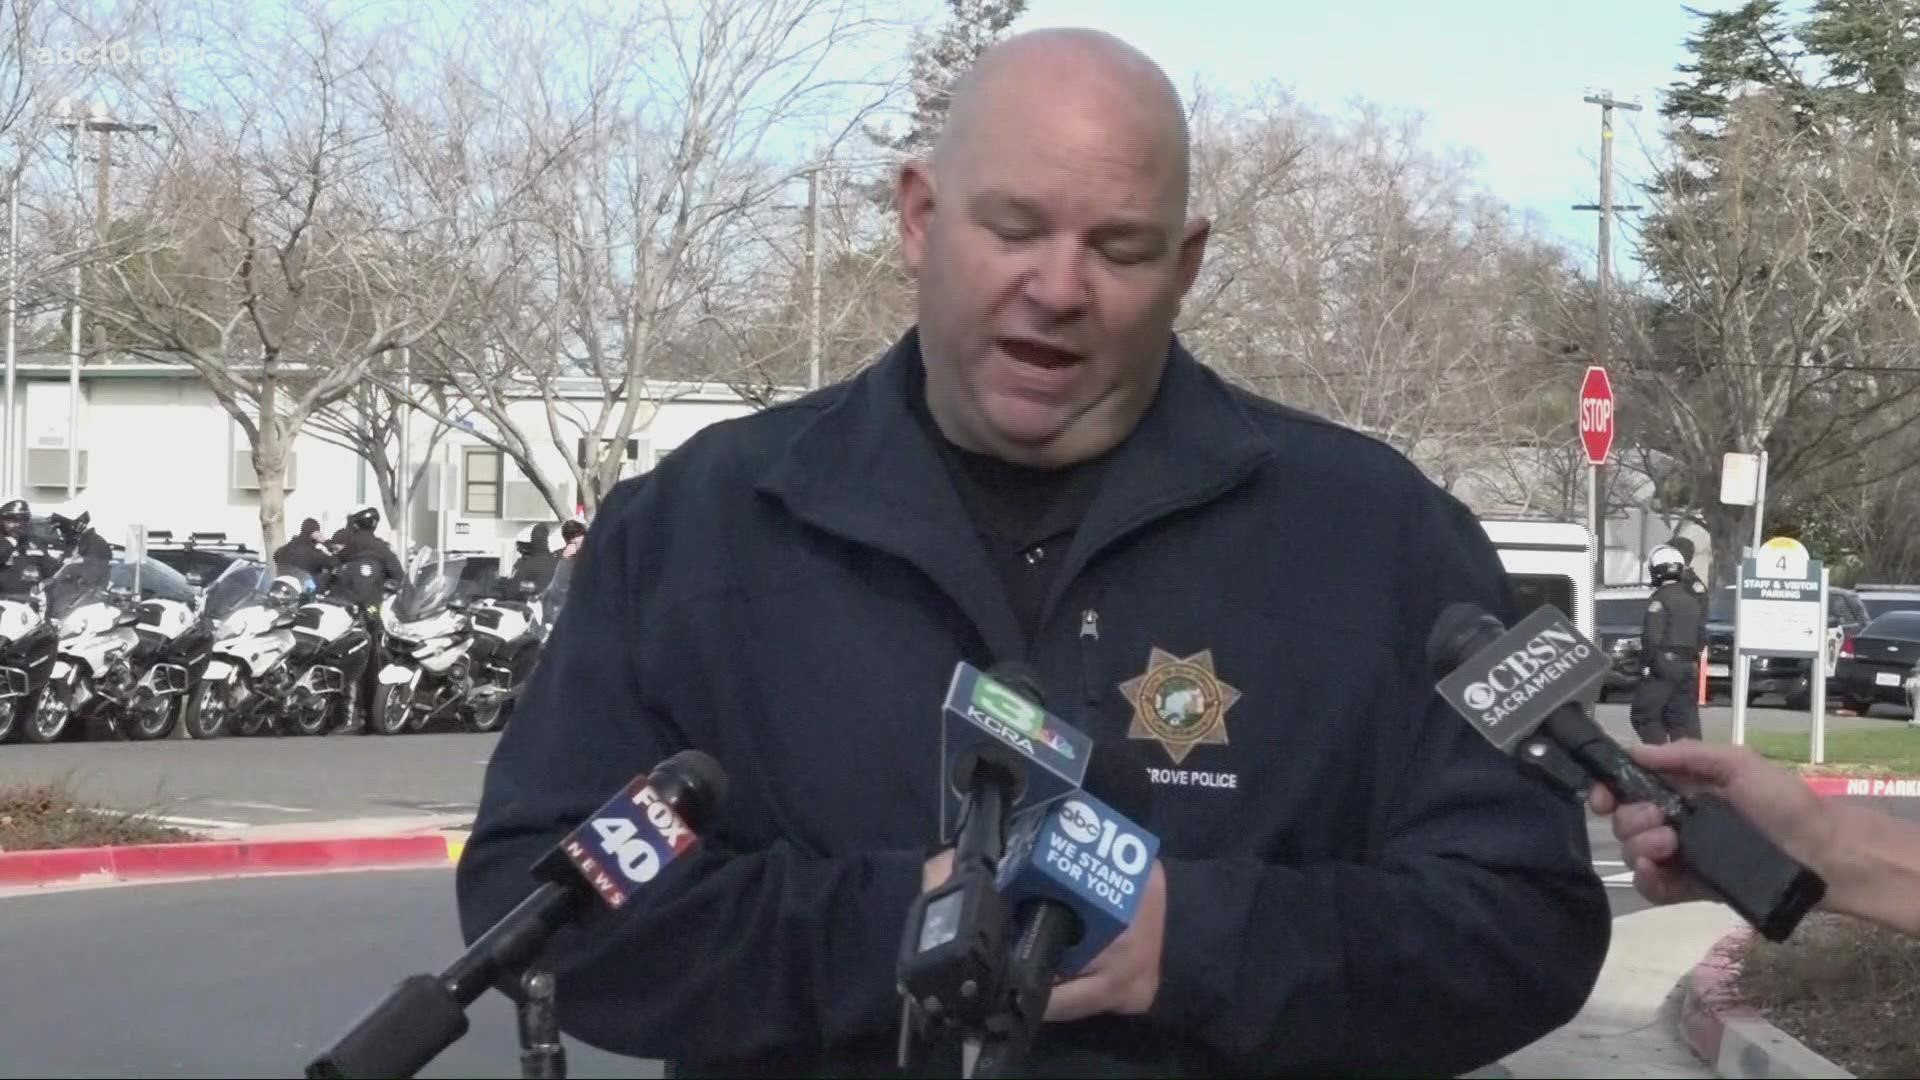 Elk Grove police gave an update on the crash that happened earlier this morning.